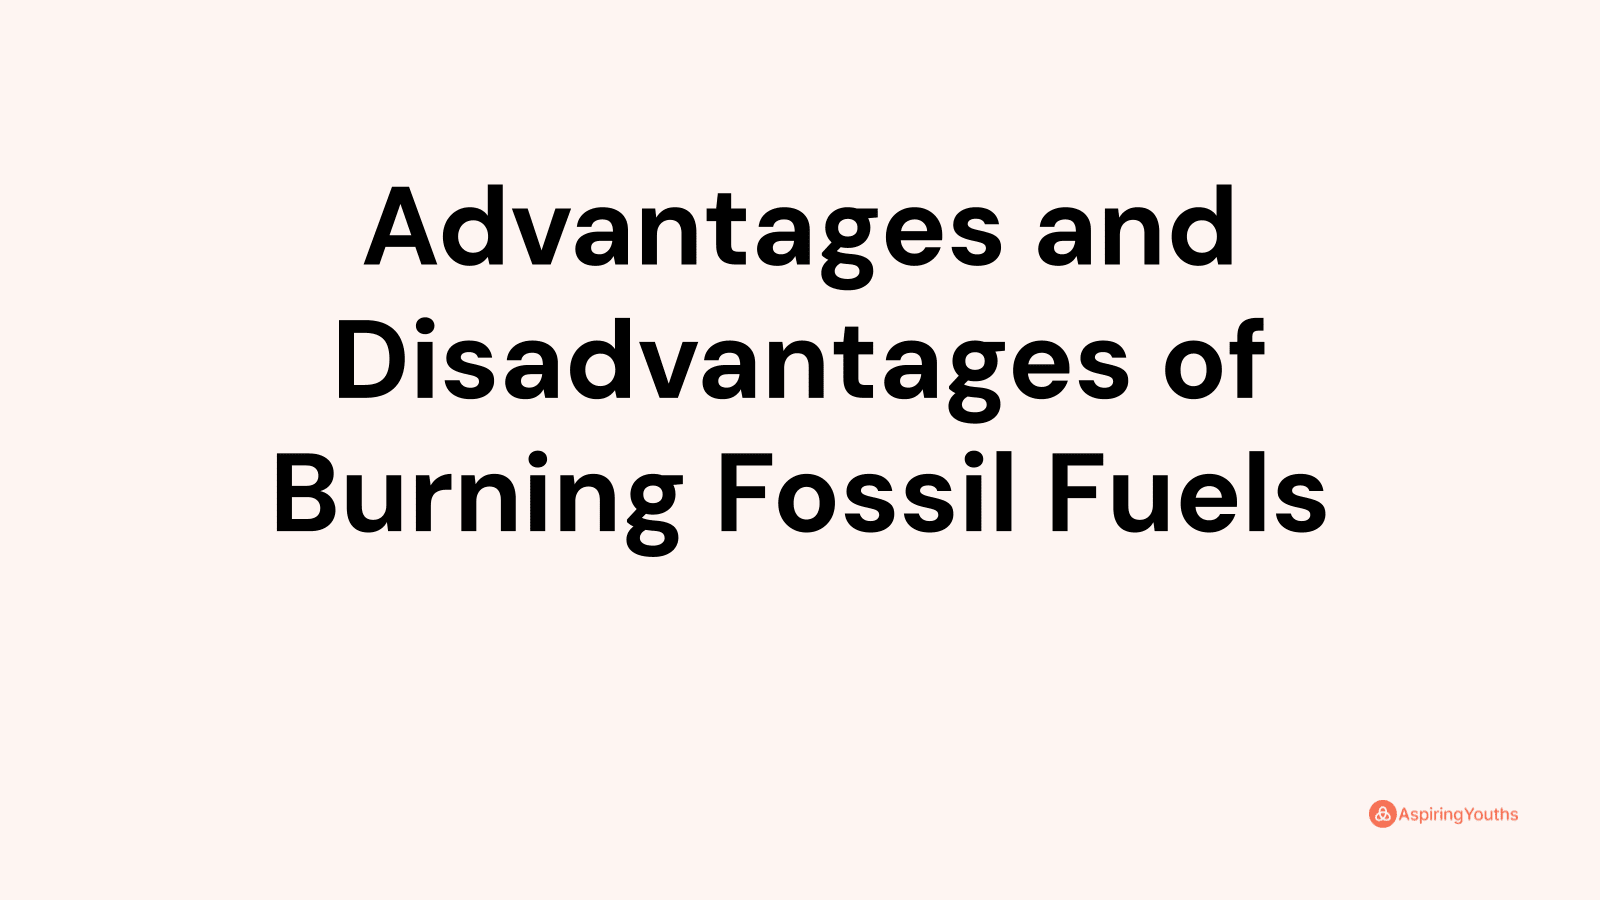 Advantages and disadvantages of Burning Fossil Fuels